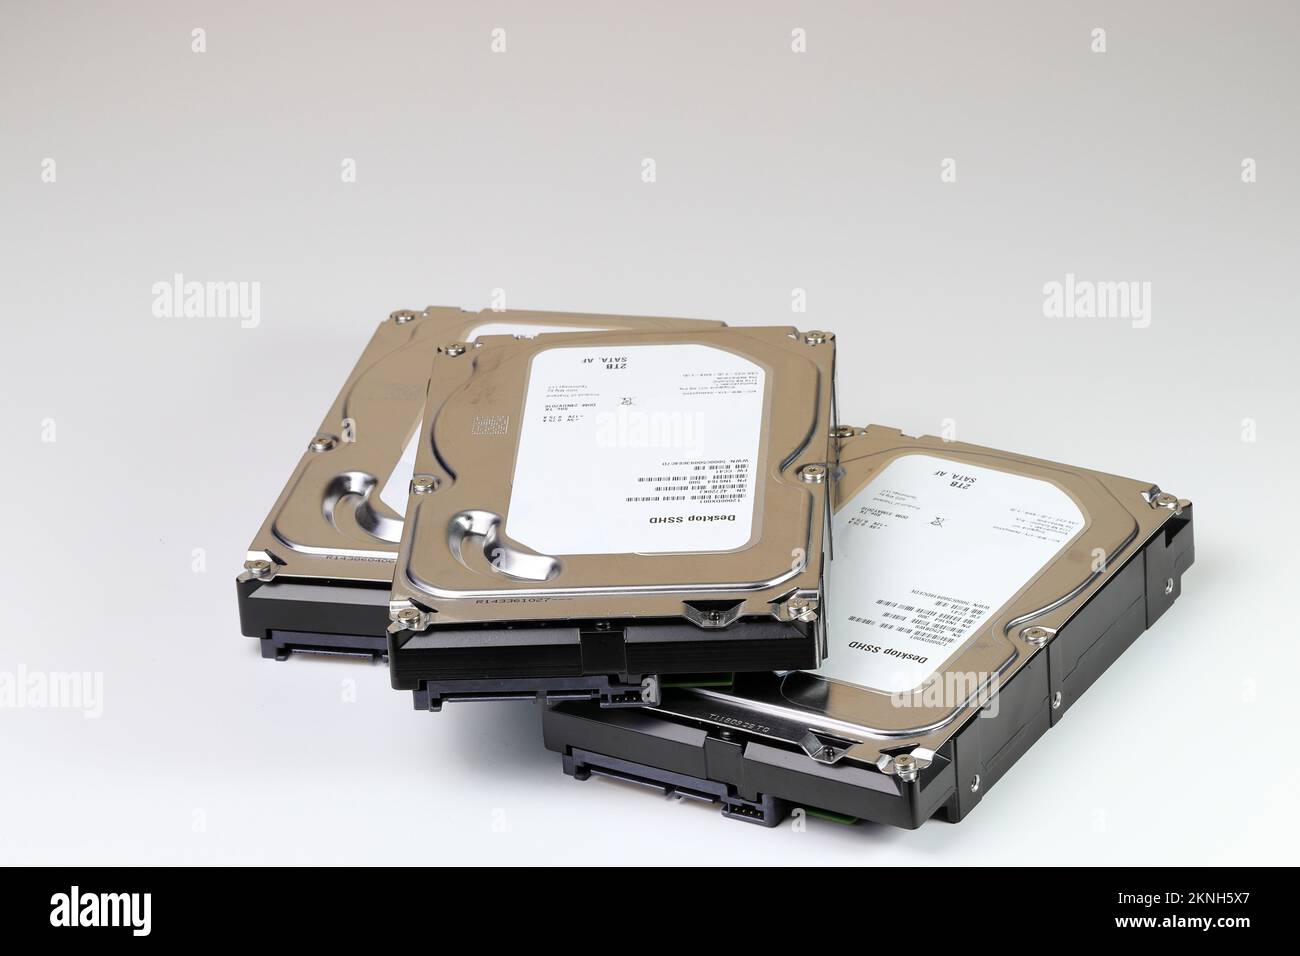 pile or stack of HDD, SSHD Hybrid hard disk drives 3.5' standard profile show on SATA interface, isolated on white background Stock Photo